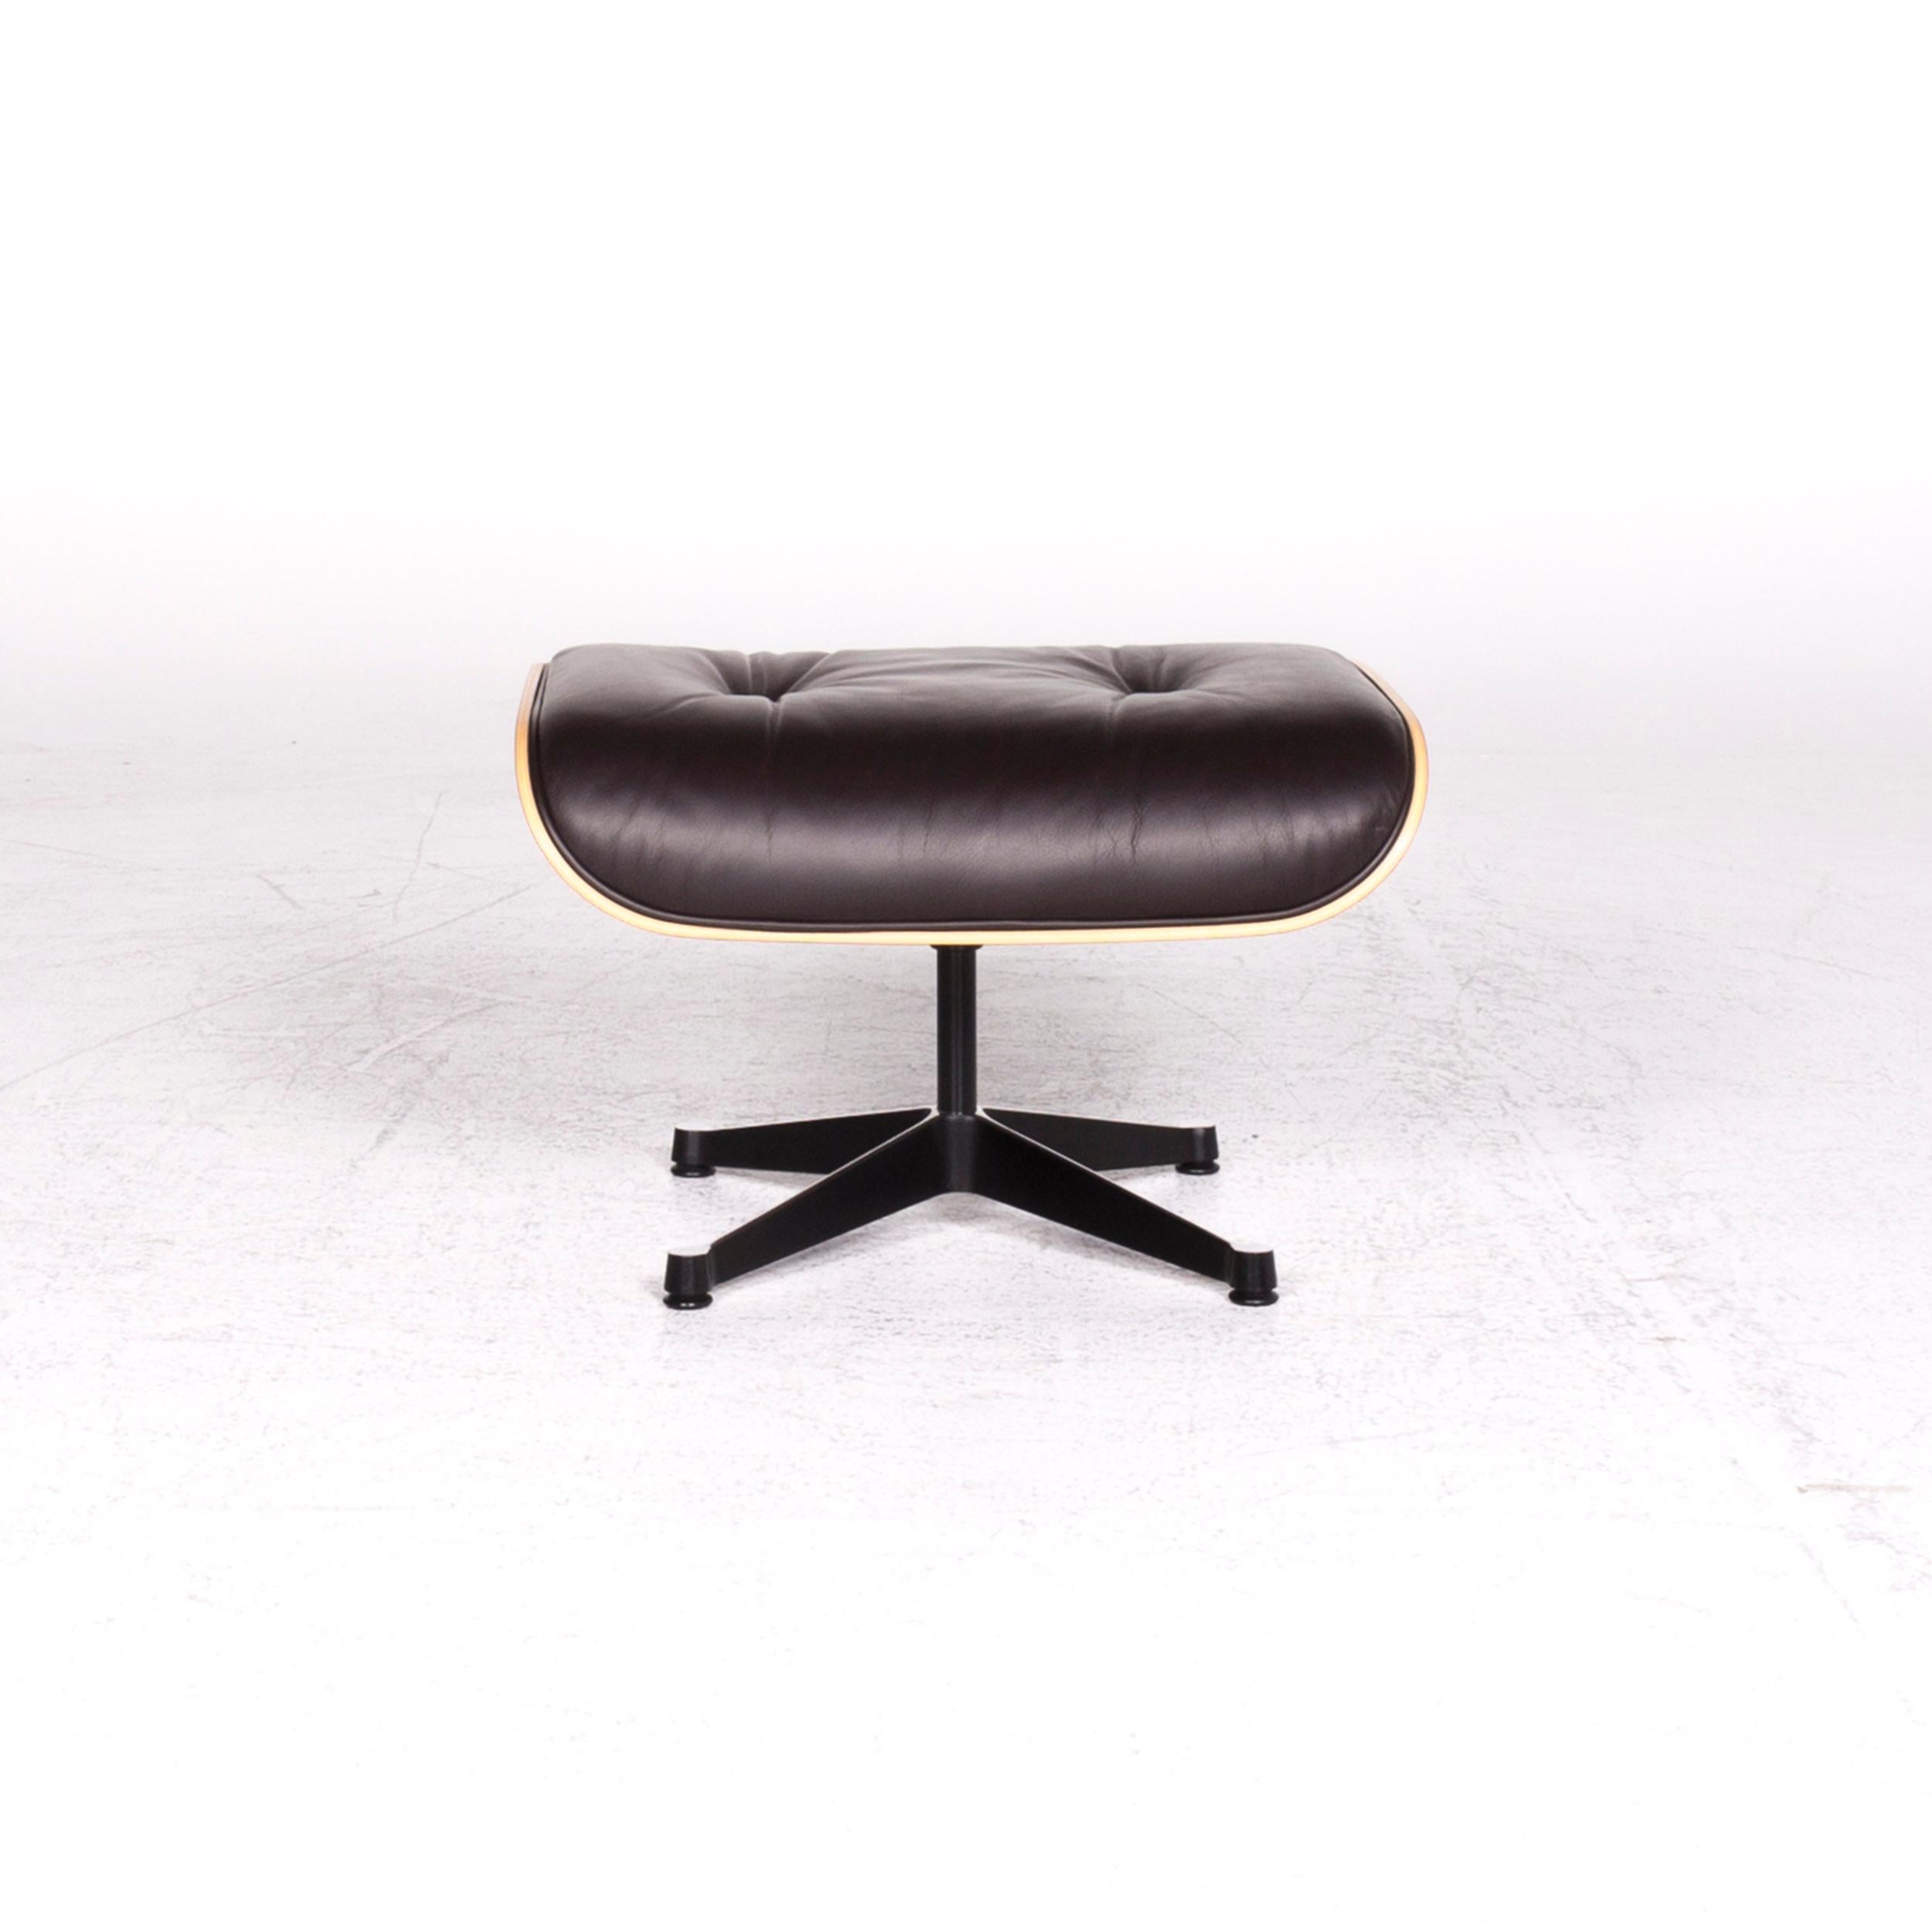 We bring to you a Vitra Eames lounge chair leather stool set brown Charles & Ray Eames chair.

 Product measurements in centimeters:
 
 Depth 54
 Width 64
Height 42.





 